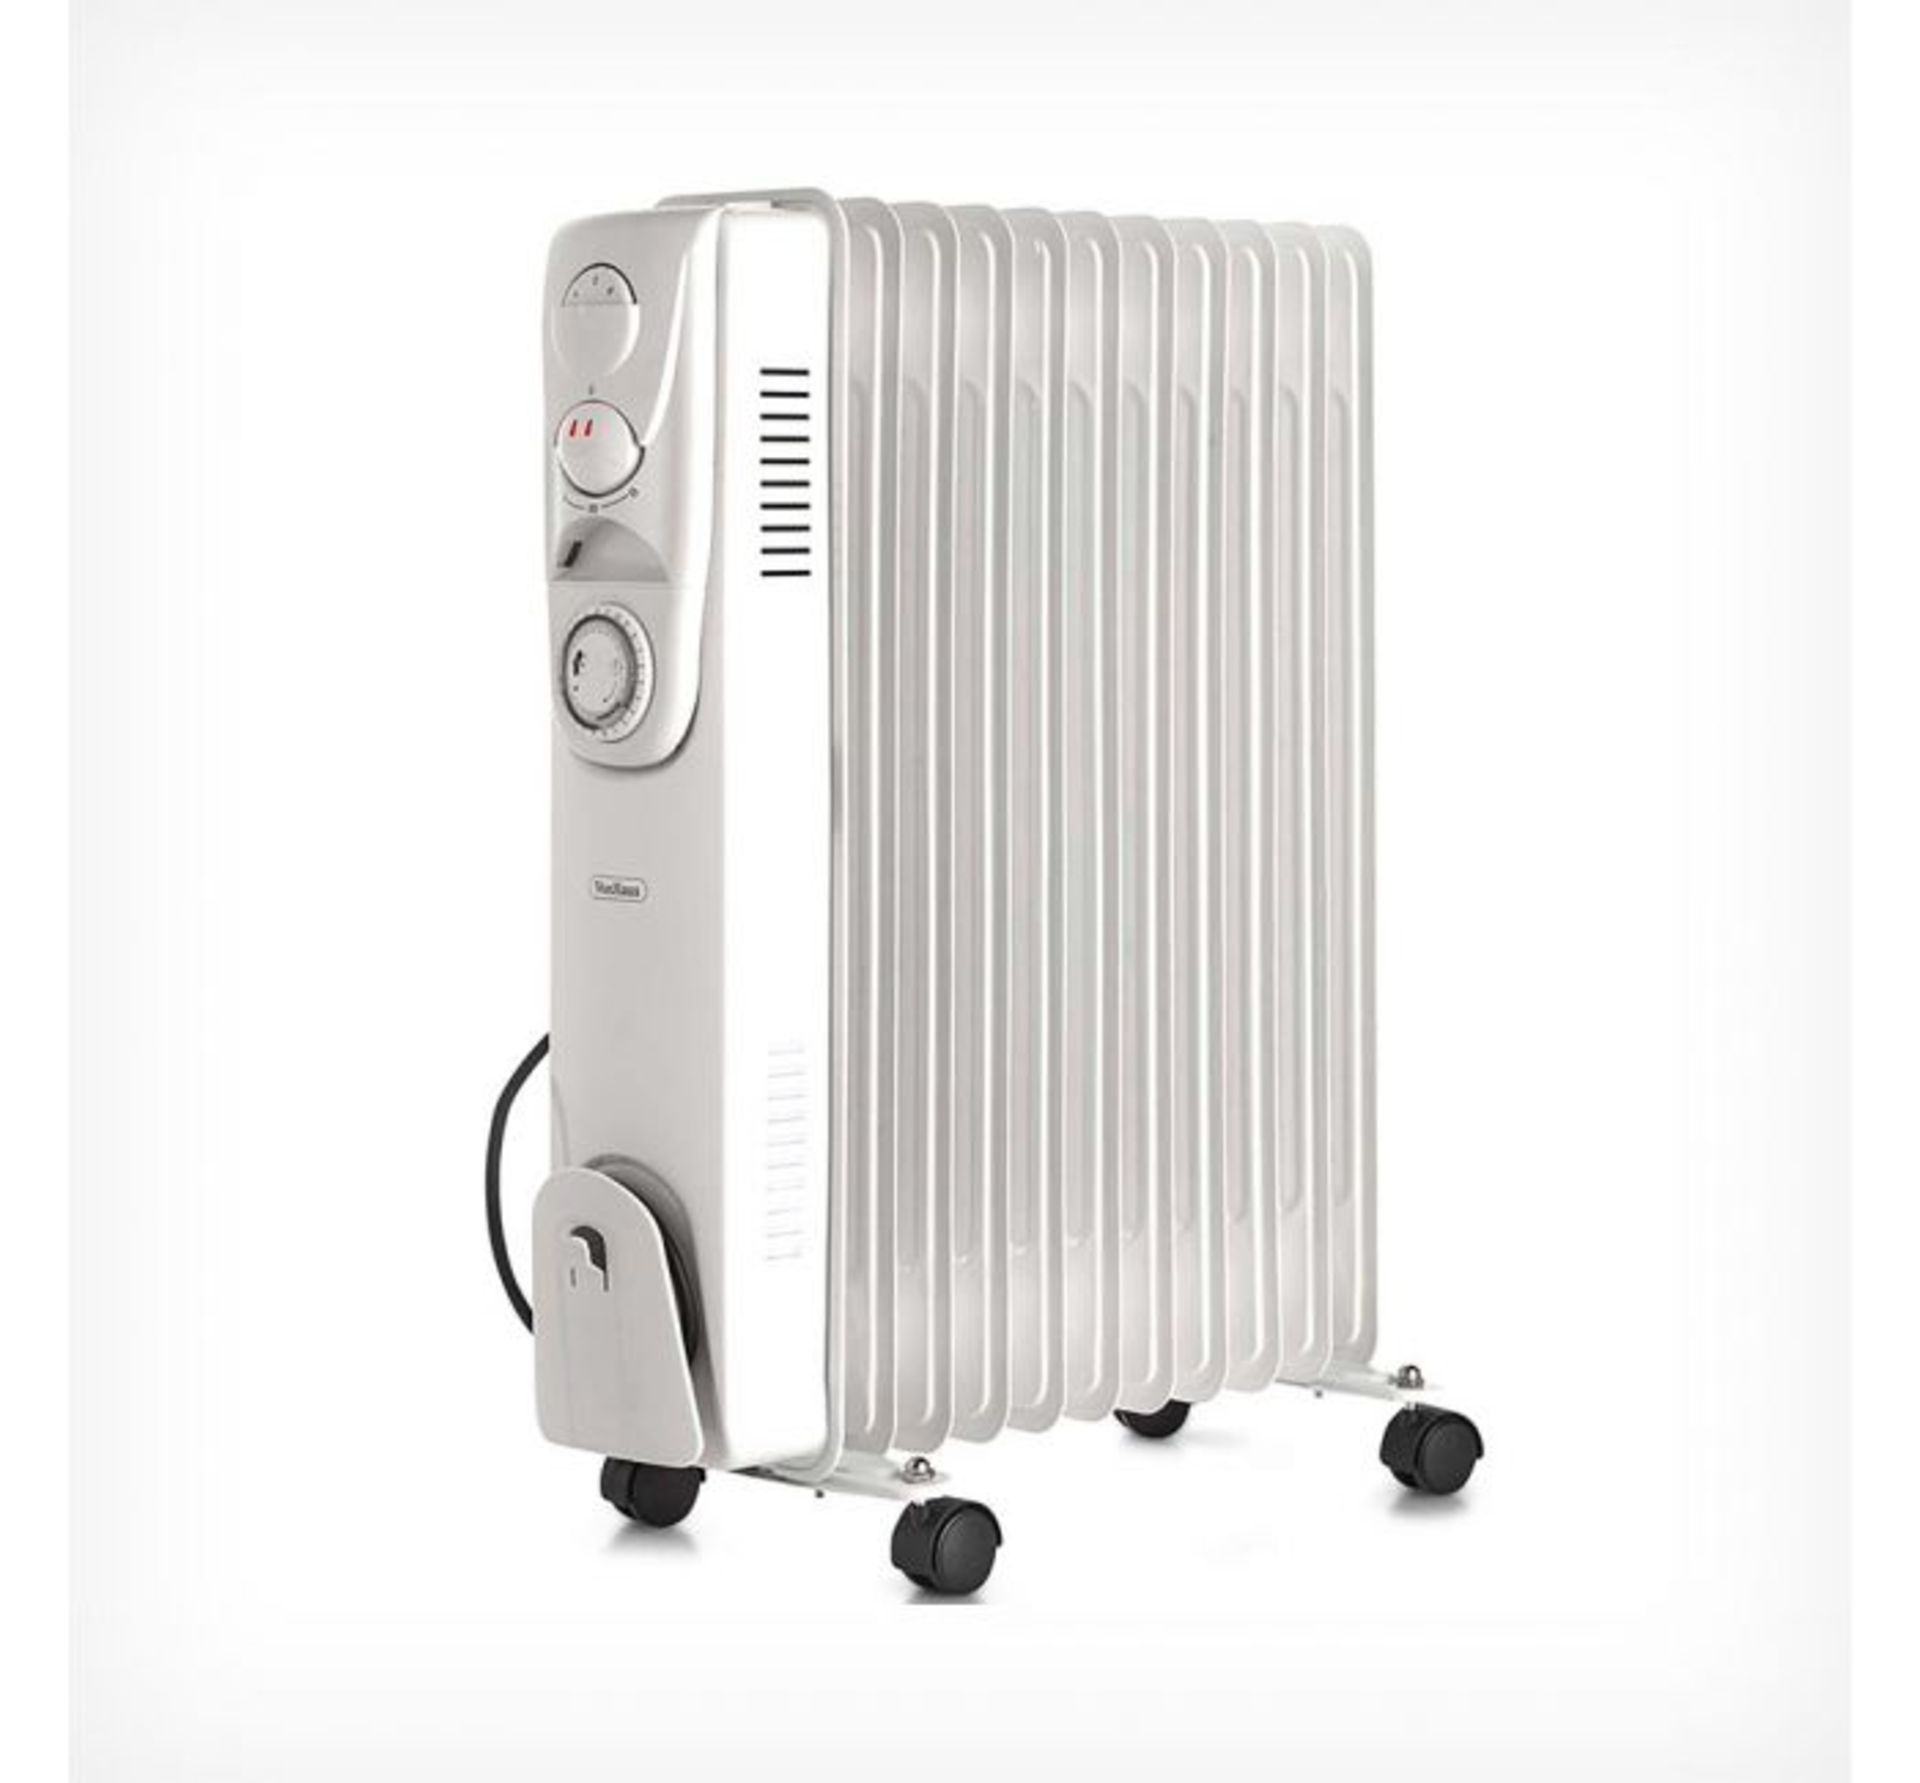 (AP143) 11 Fin 2500W Oil Filled Radiator - White Suitable for areas up to 28 square metres ... - Image 2 of 2